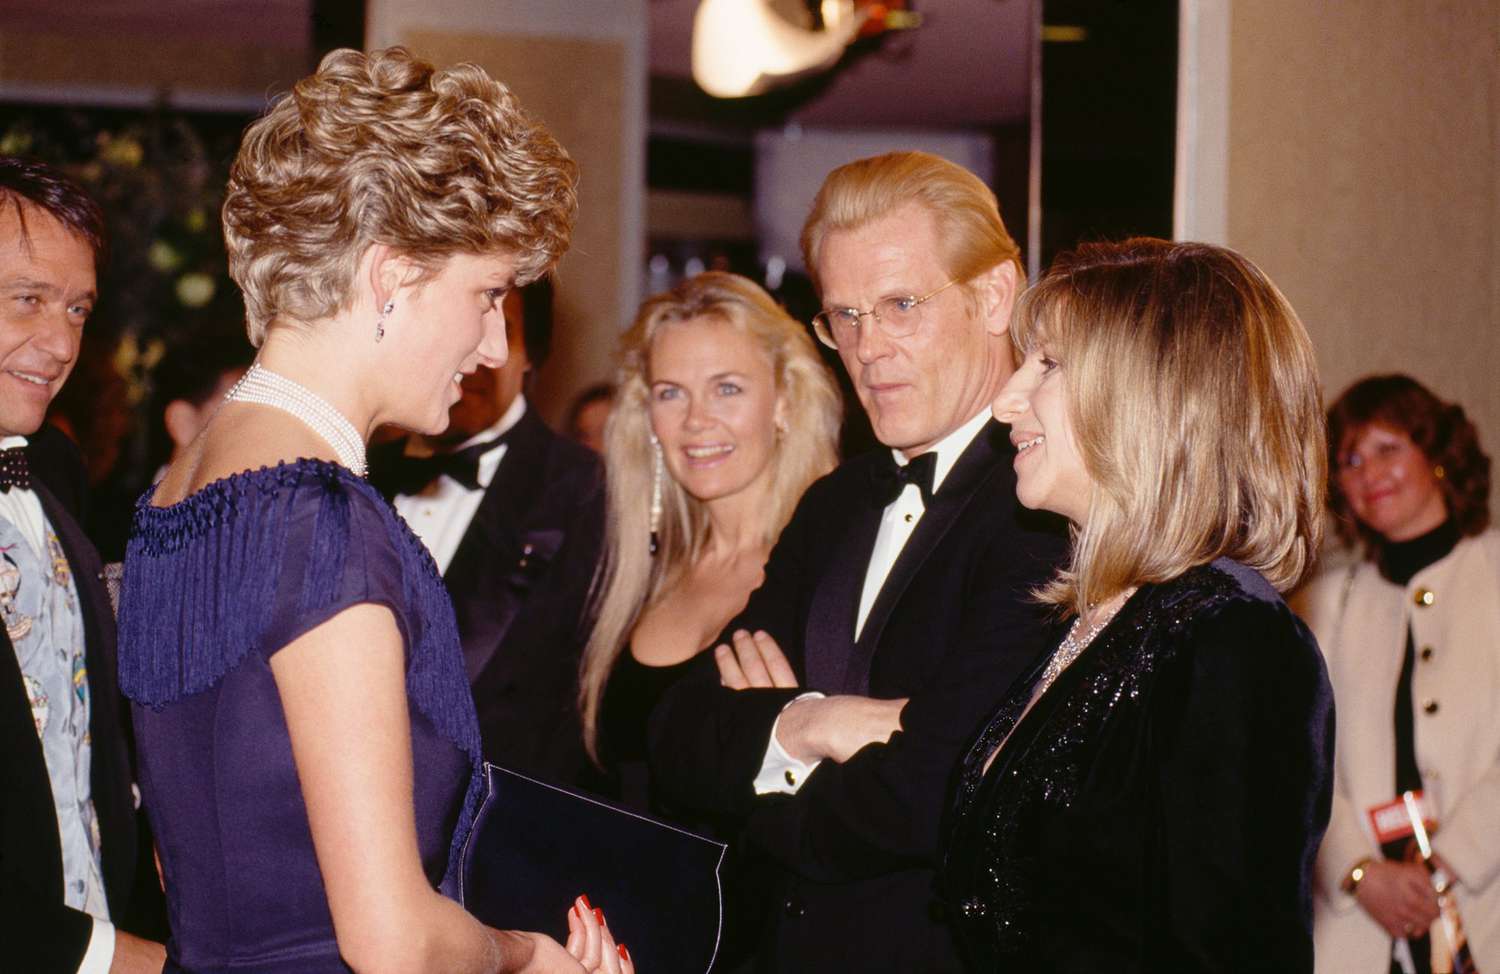 Barbra Streisand reveals what Princess Diana asked her in 1992 meeting